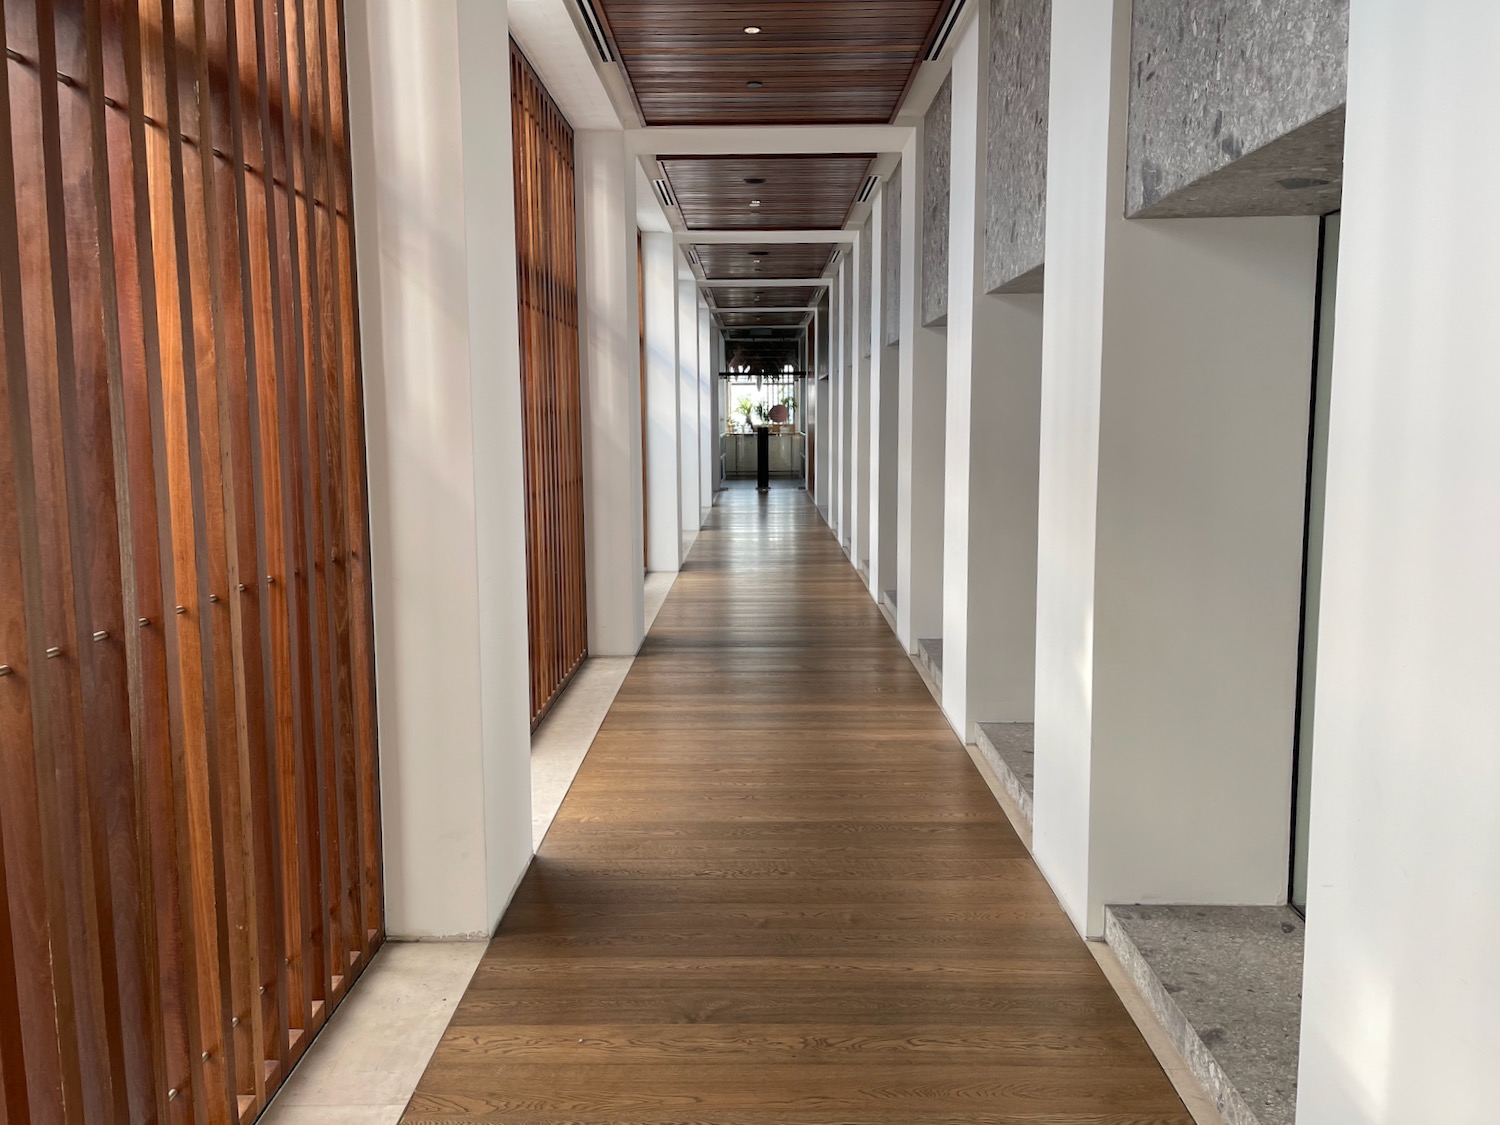 a long hallway with white pillars and wood floor